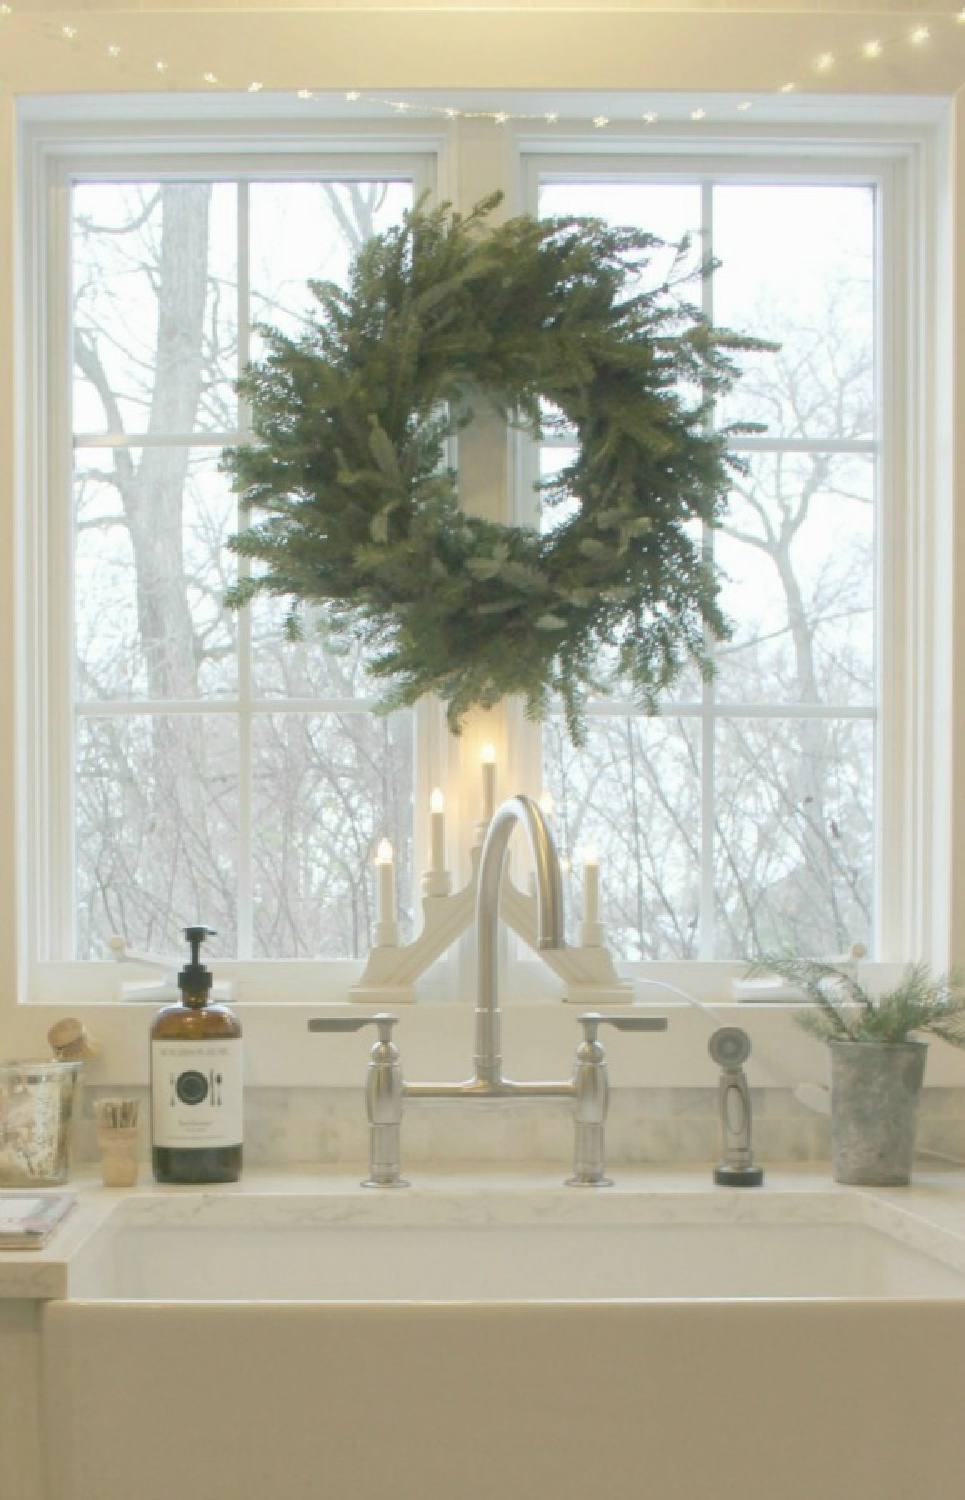 Hello Lovely Christmas wreath and Swedish candleabra at the kitchen sink window 2019.